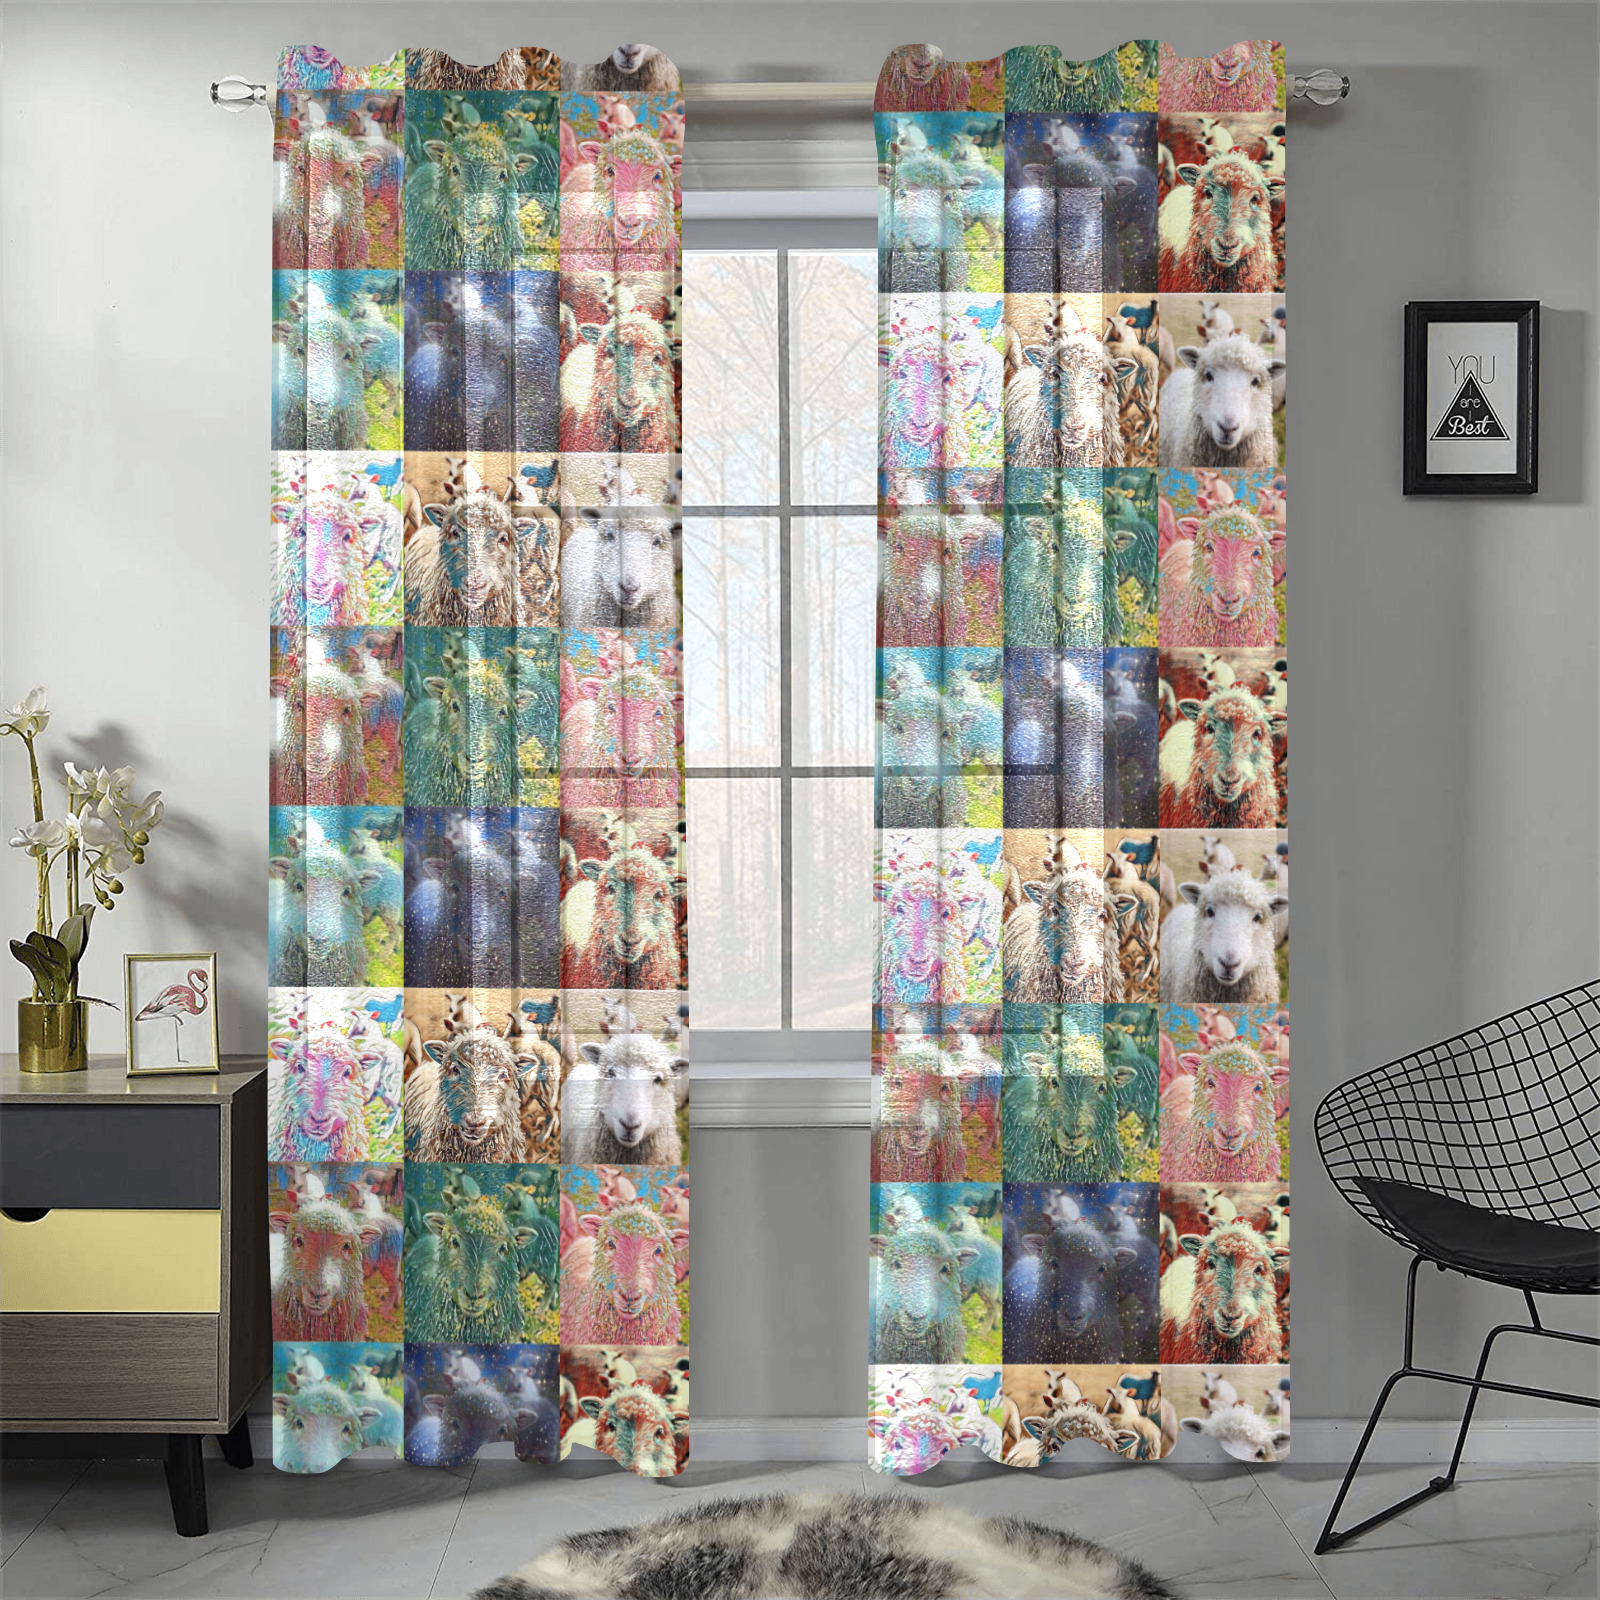 Sheep With Filters Collage Gauze Curtain 28"x84" (Two-Piece)